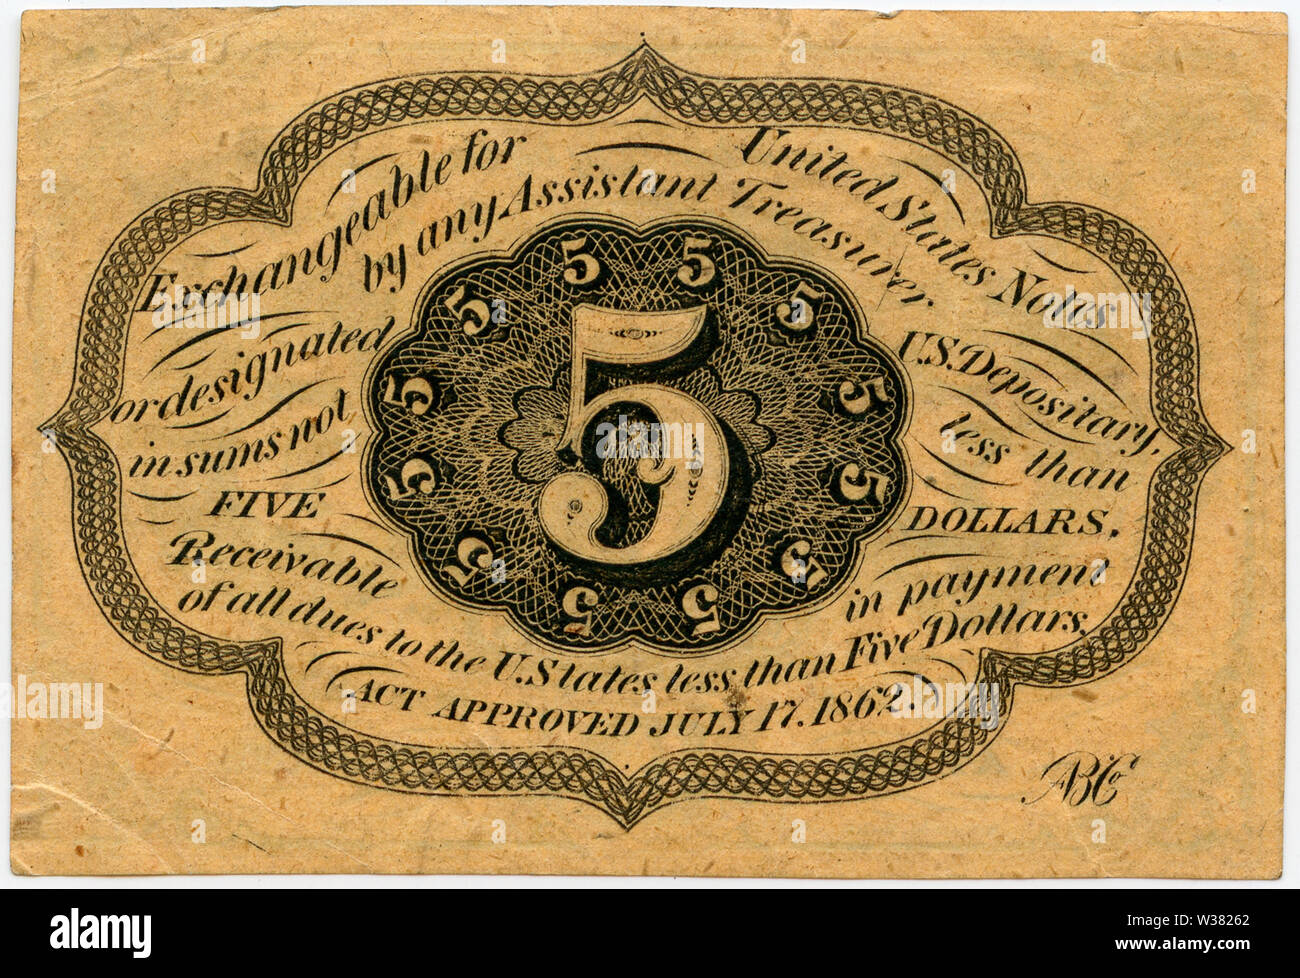 Five-cent US Postal Currency, first issue, featuring Thomas Jefferson. Gold, silver and copper coins were horded at the start of the  Civil War and postages stamps became a popular form of currency; however the adhesive back was a serious impediment. On July 17, 1862, Congress authorized printing of Postal Currency notes in the denominations of 5, 10, 25 and 50 cents. These notes could be redeemed for postage stamps or for a US bank note in the amount of five dollars or more. The  Postal Currency was succeeded by  Fractional Currency in 1863. The Post Office kept detailed records and 44,857,78 Stock Photo